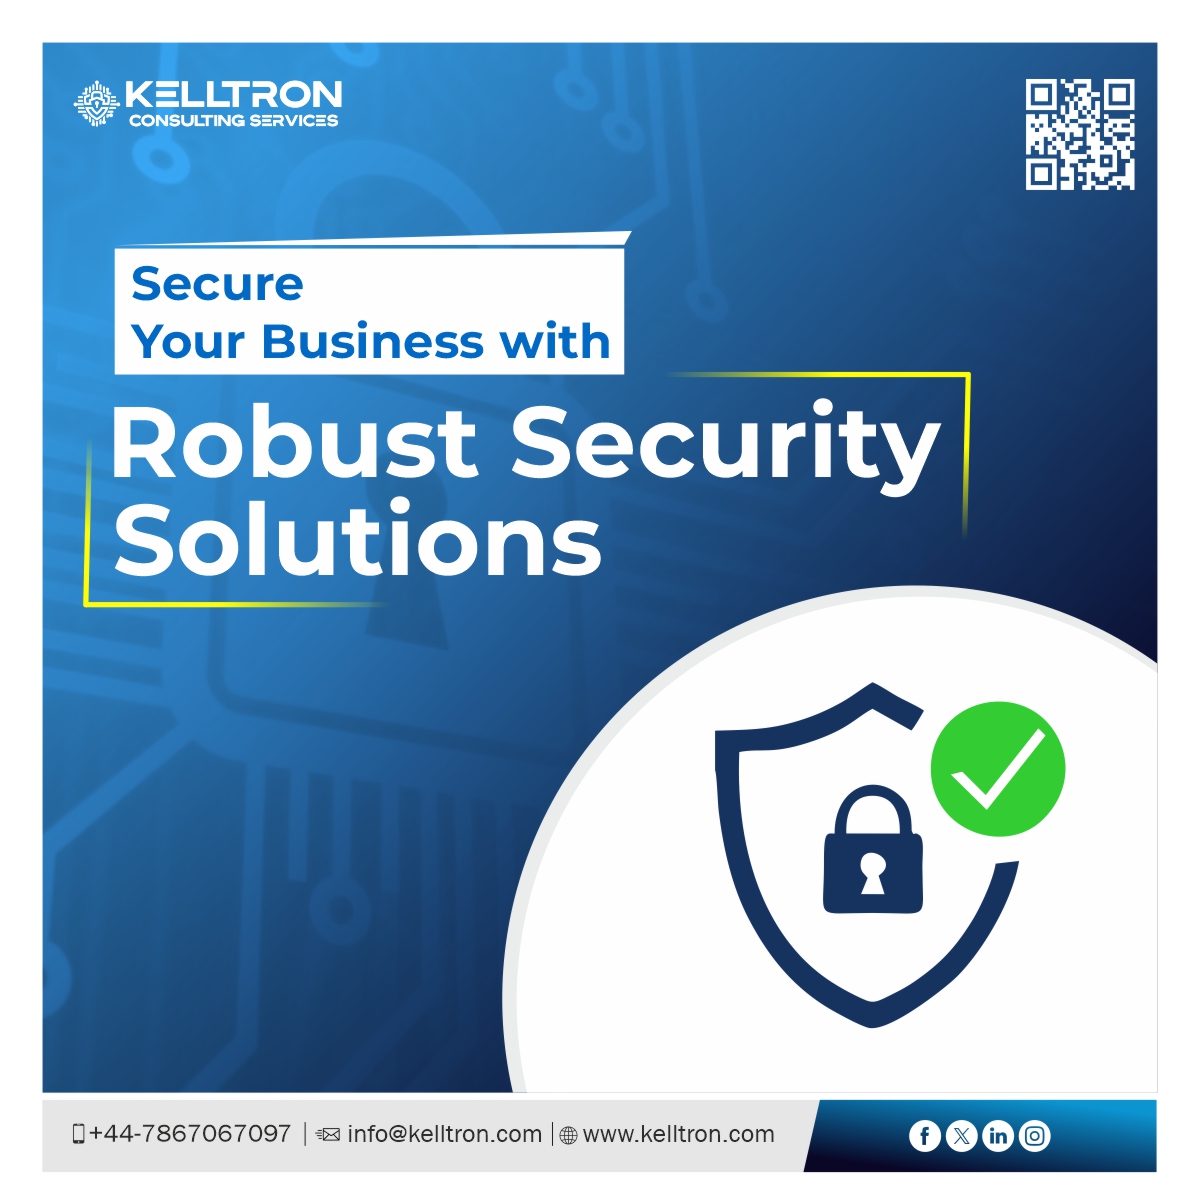 In today's digital world, security is non-negotiable. Kelltron offers robust security solutions to protect your business from cyber threats.

#identity #security #safety #theft #vapt #identityaccess #kelltron #robust #solutions #identityservice #soc